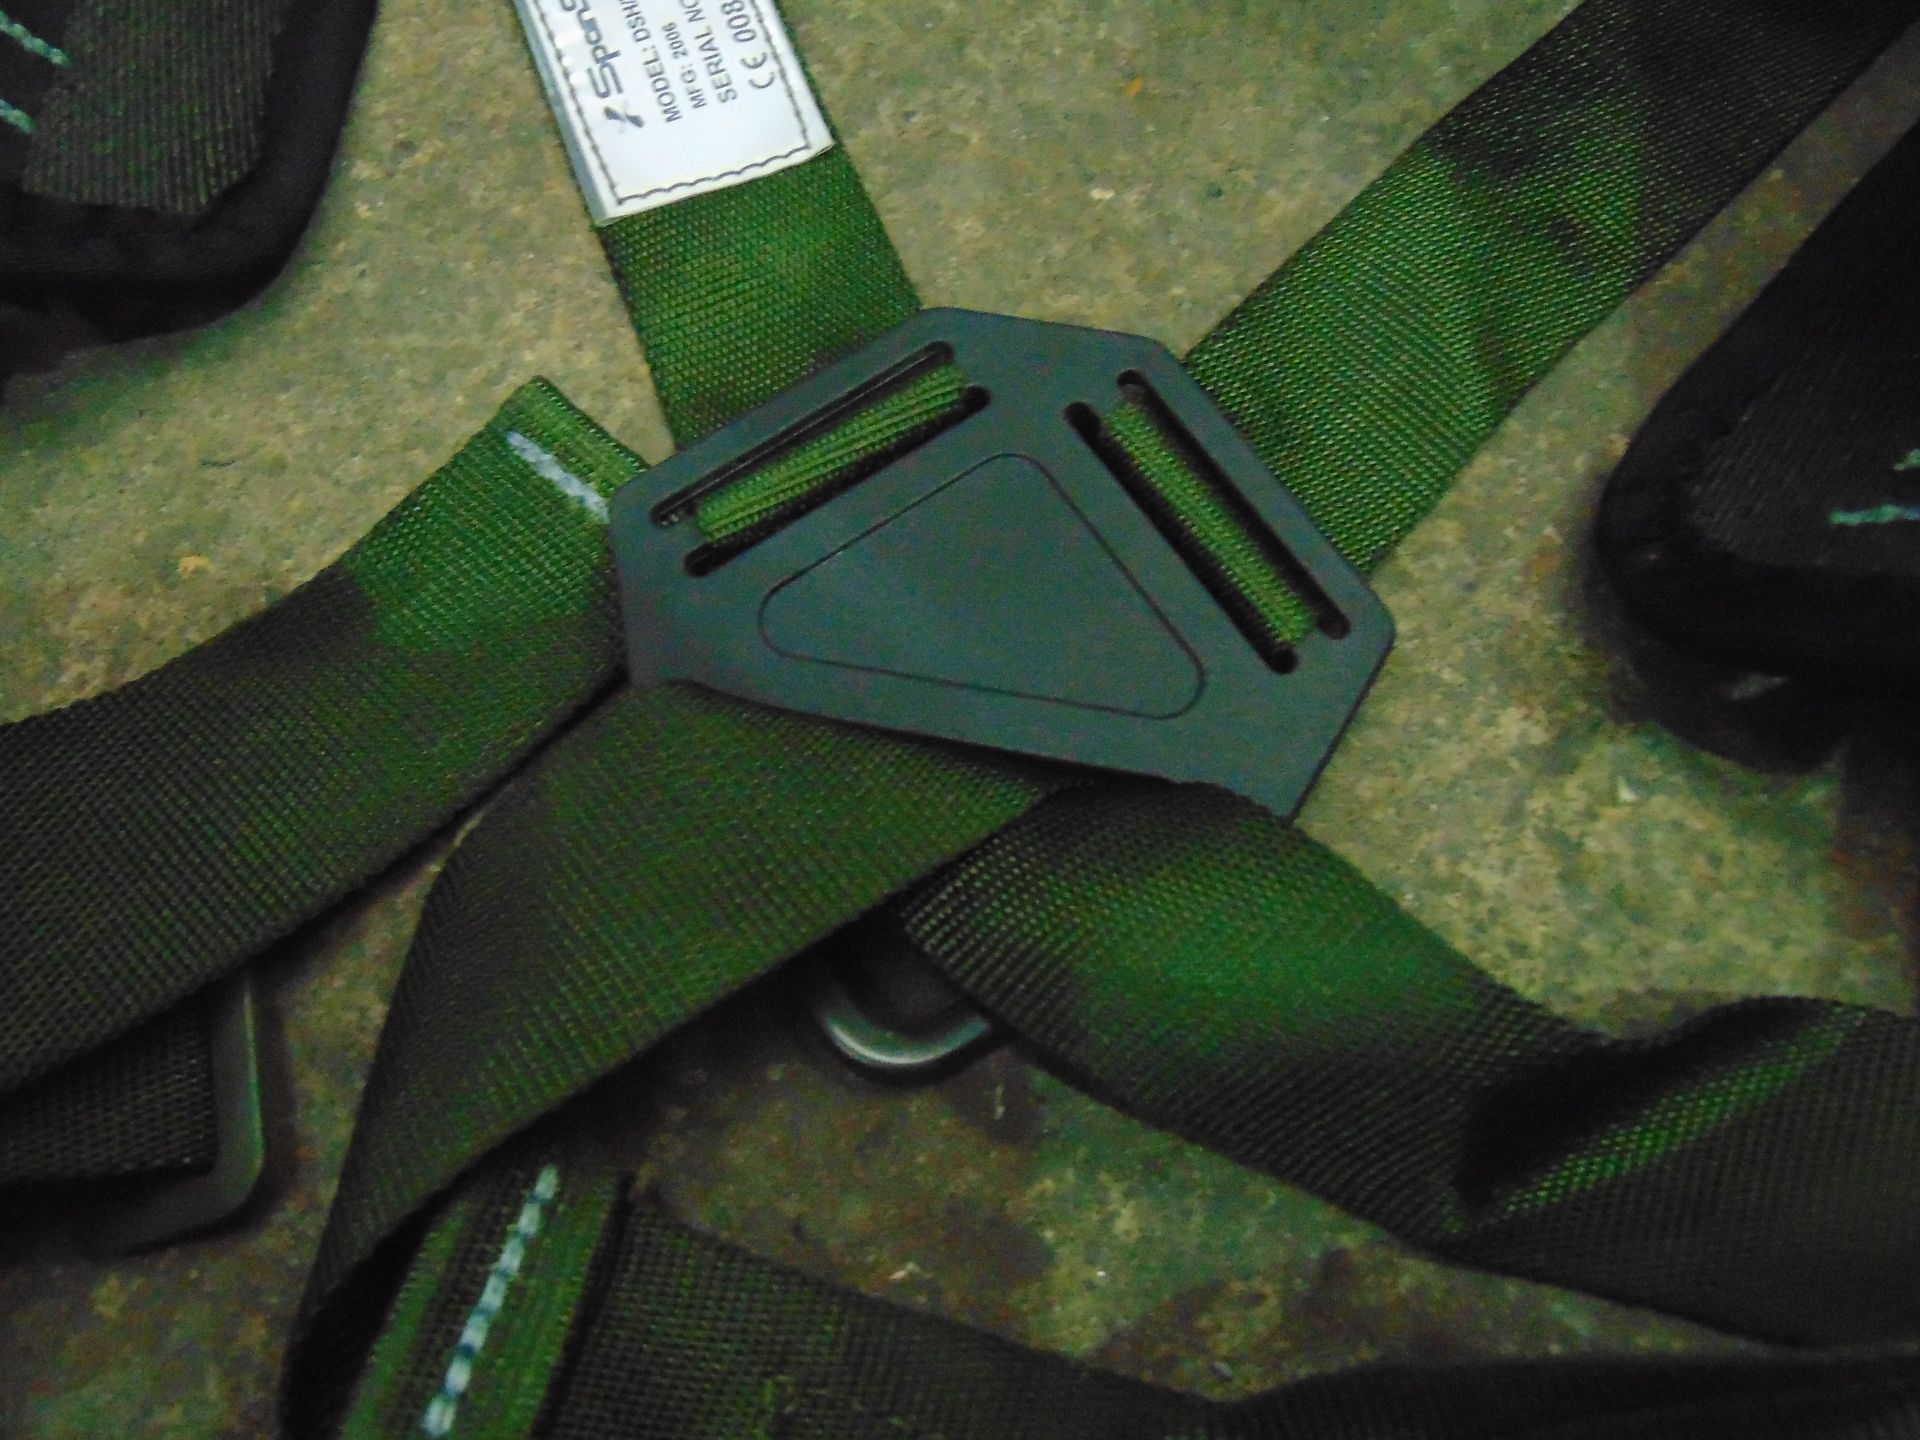 Spanset Full Body Harness with Work Position Lanyards etc - Image 16 of 24